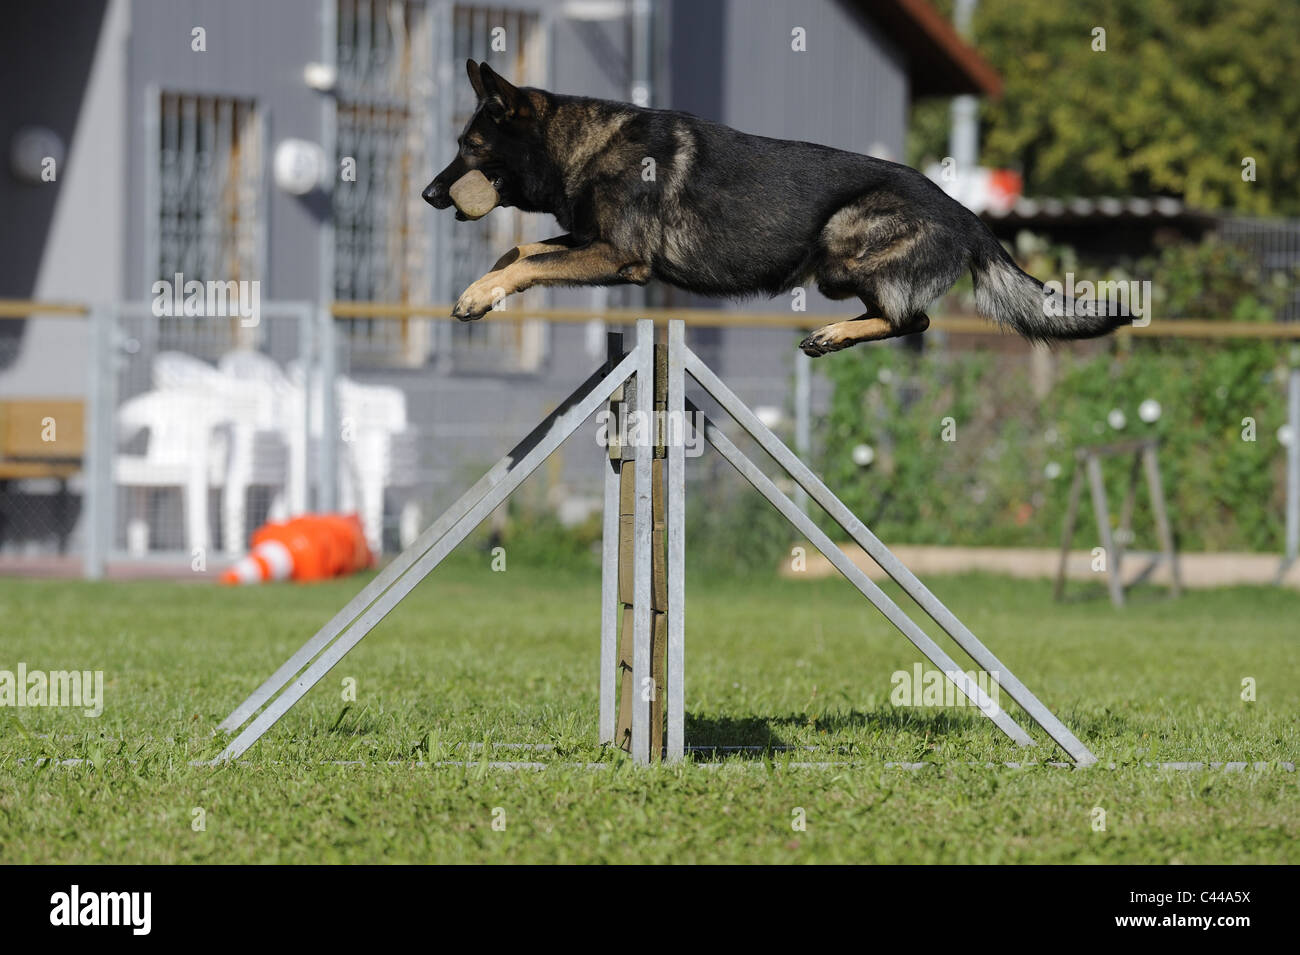 German Shepherd Dog, Alsatian (Canis lupus familiaris). Male jumping over an hurdle during its guard dog training. Stock Photo